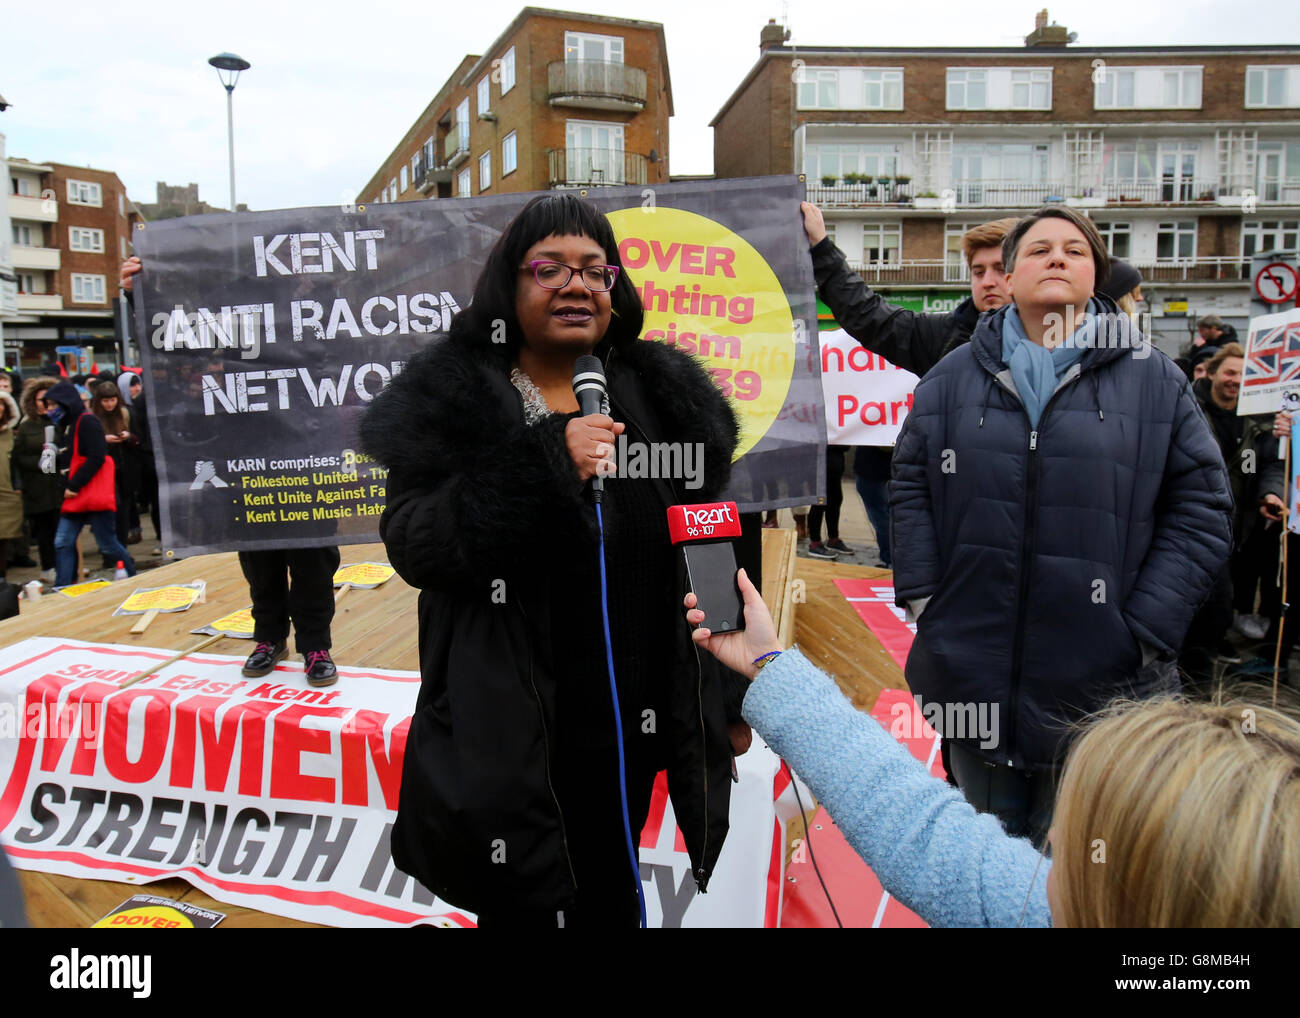 Diane Abbott MP makes a speech during a counter demonstration as far-right groups protest against immigration in Dover, Kent. Stock Photo